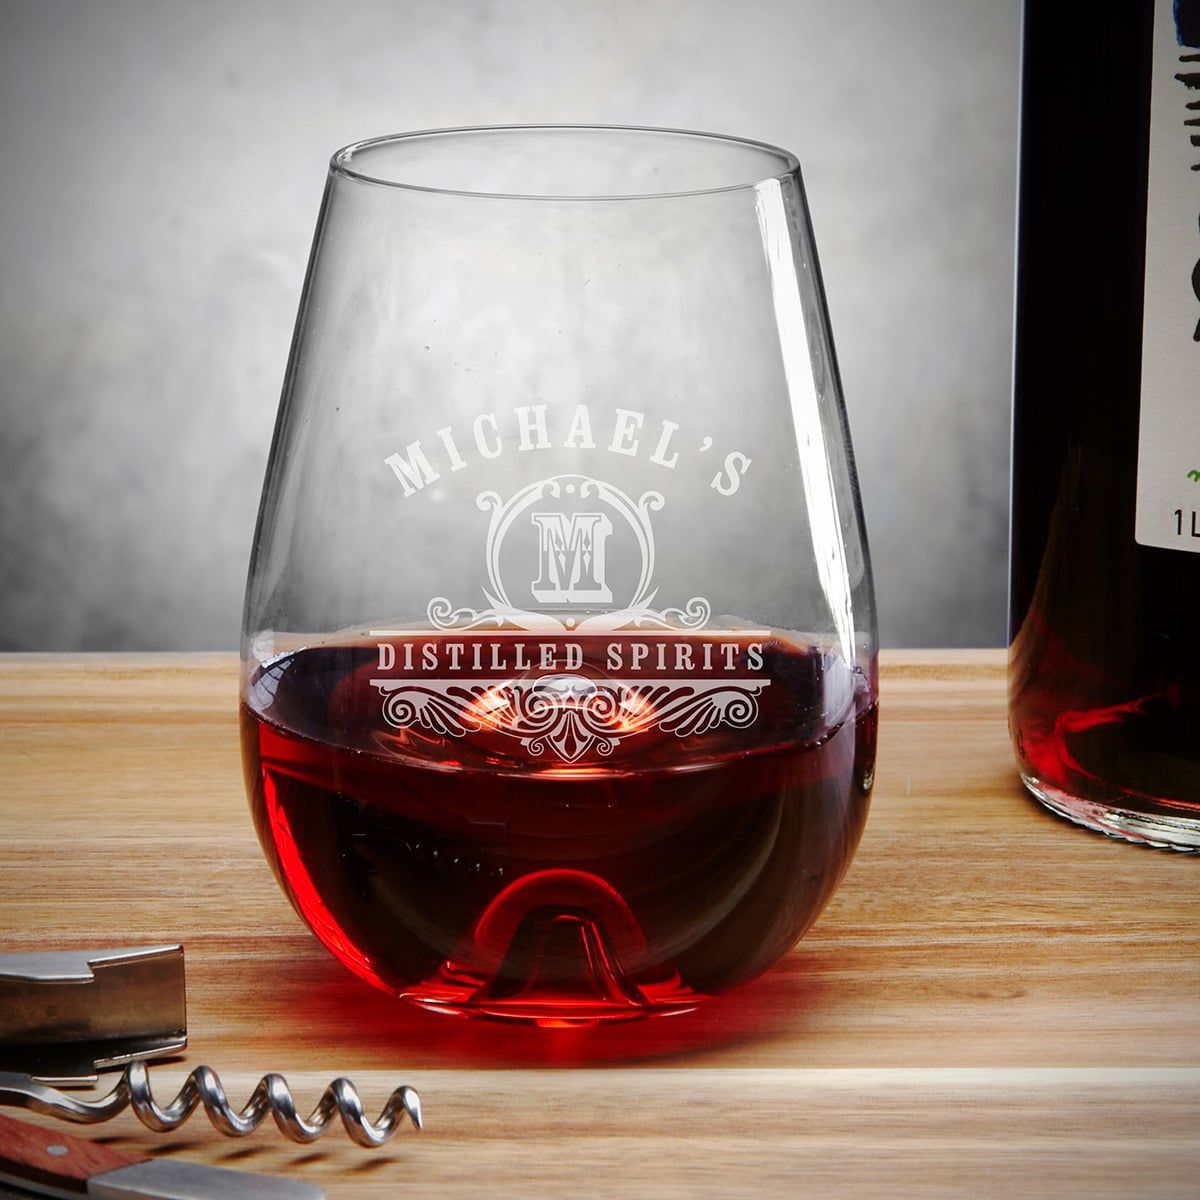 Stolzle Personalized Aerating Wine Glass Stemless